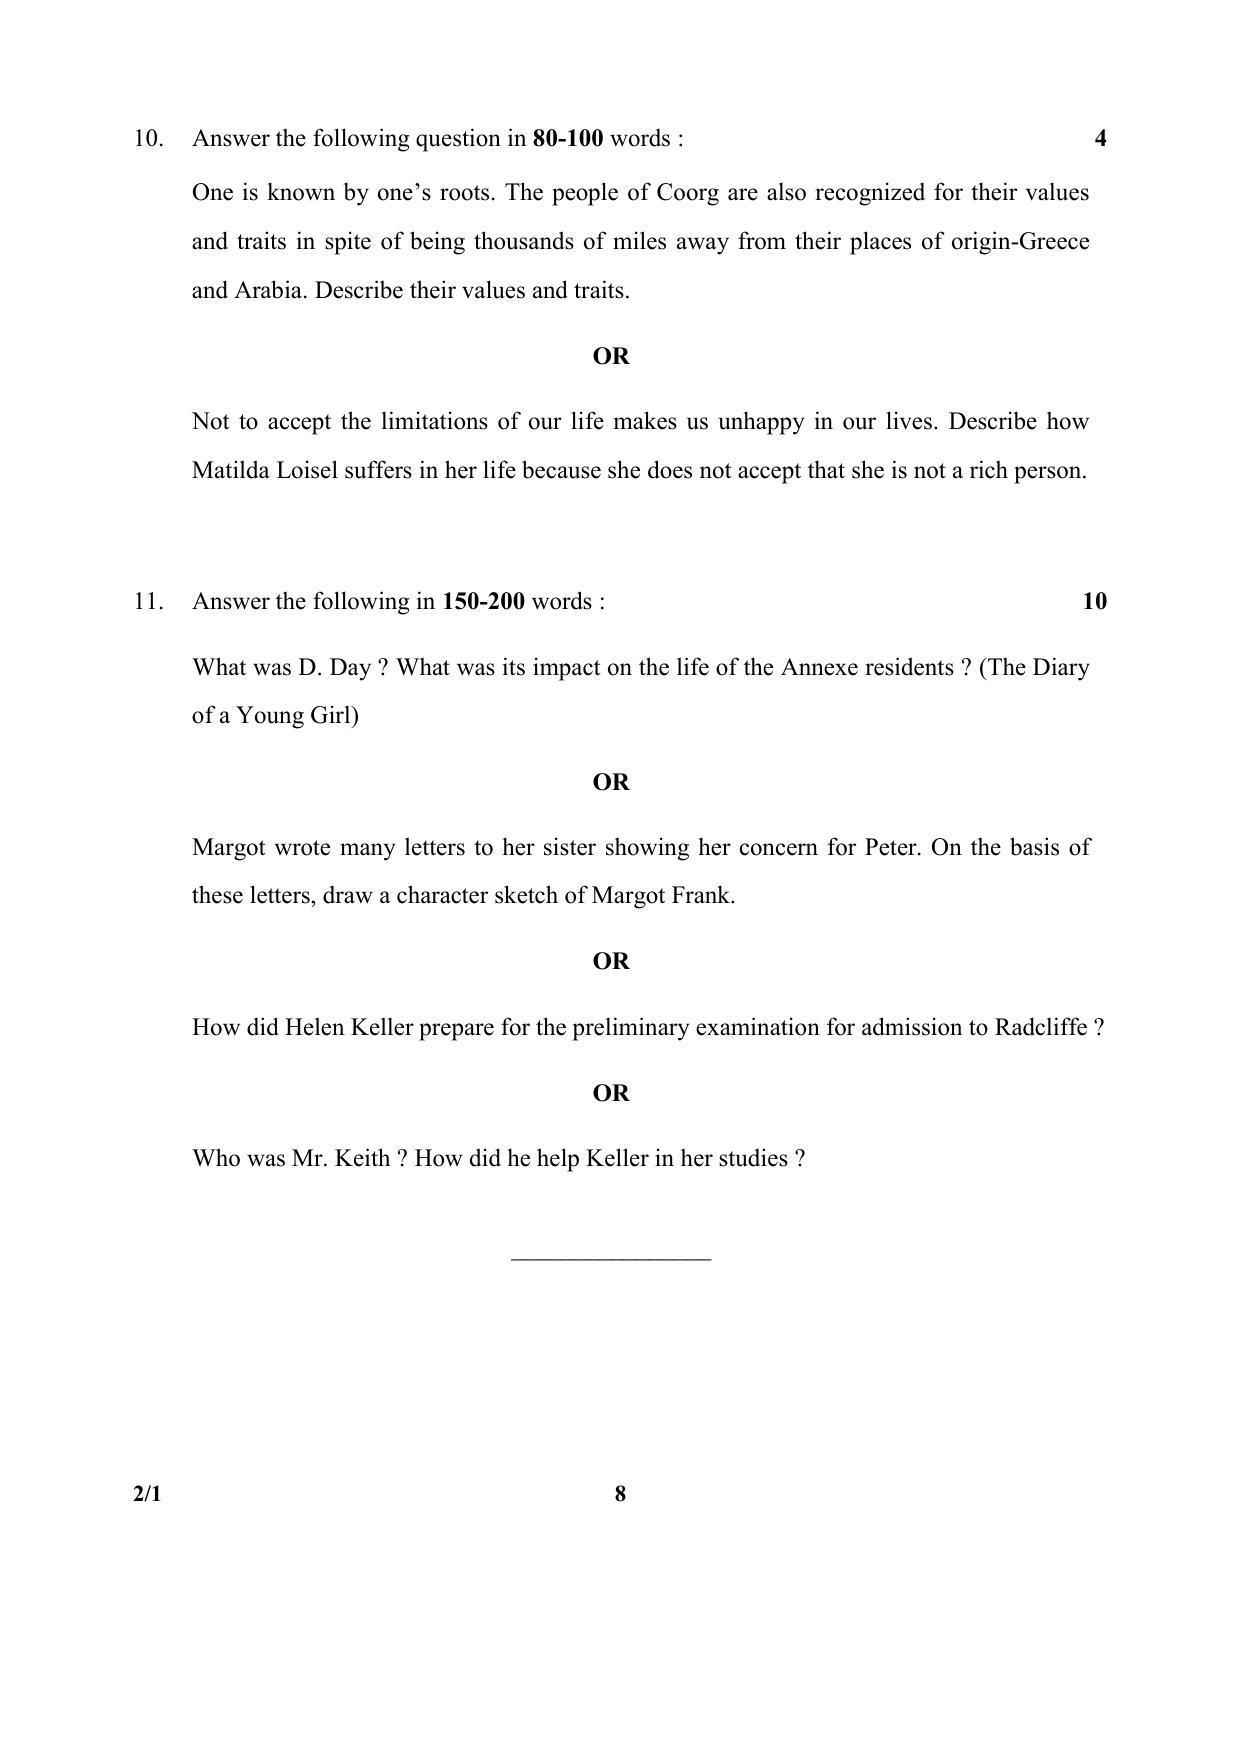 CBSE Class 10 2-1 English (Language And Literature) 2017-comptt Question Paper - Page 8